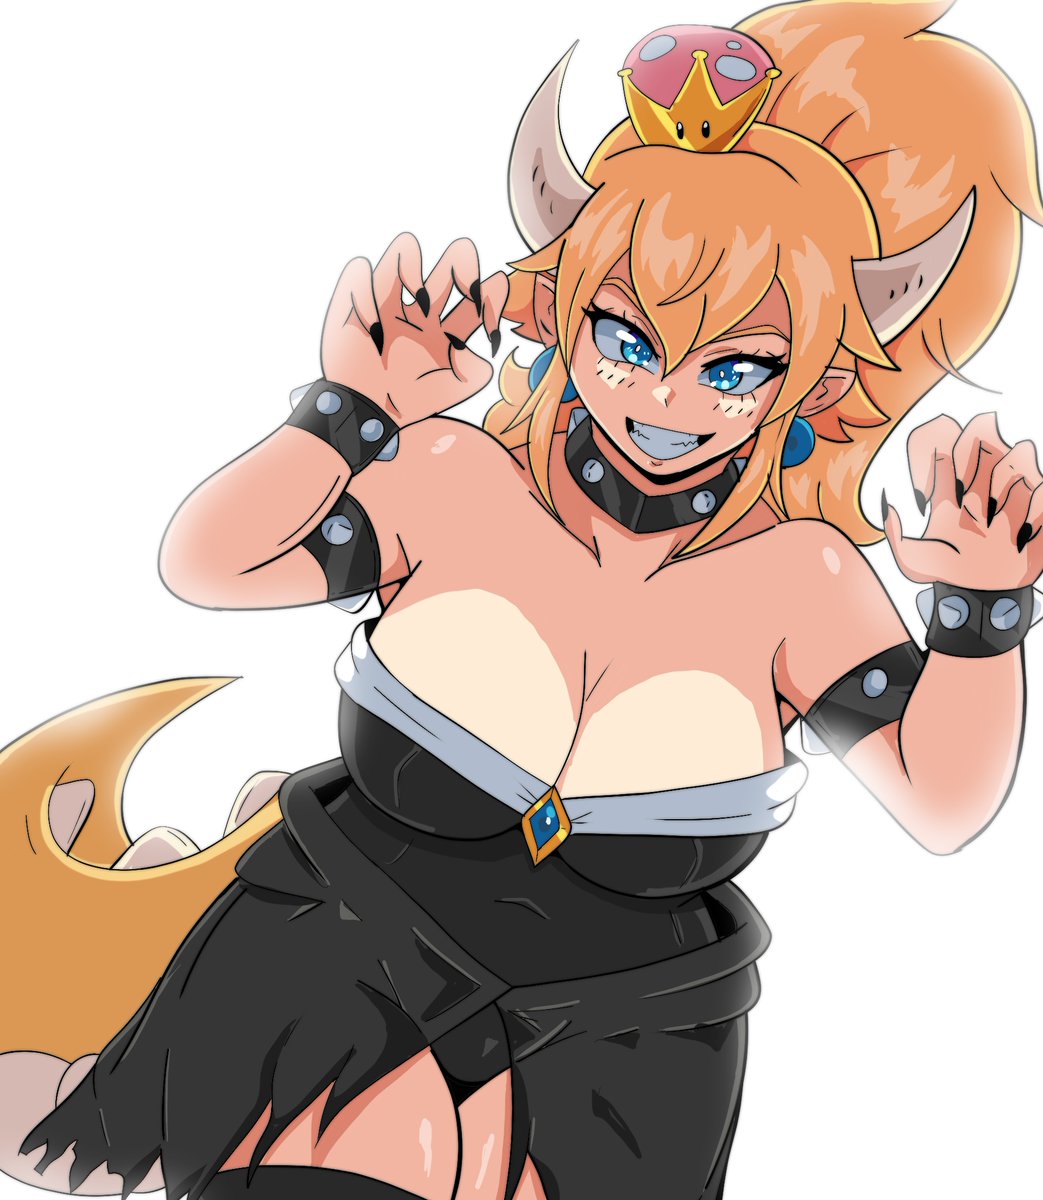 Just reposting a pic I really like. I think I did the light on this one pretty dang well! Bowsette kinda fell off in the whole internet popularity thing, but she's still a queen in our hearts.